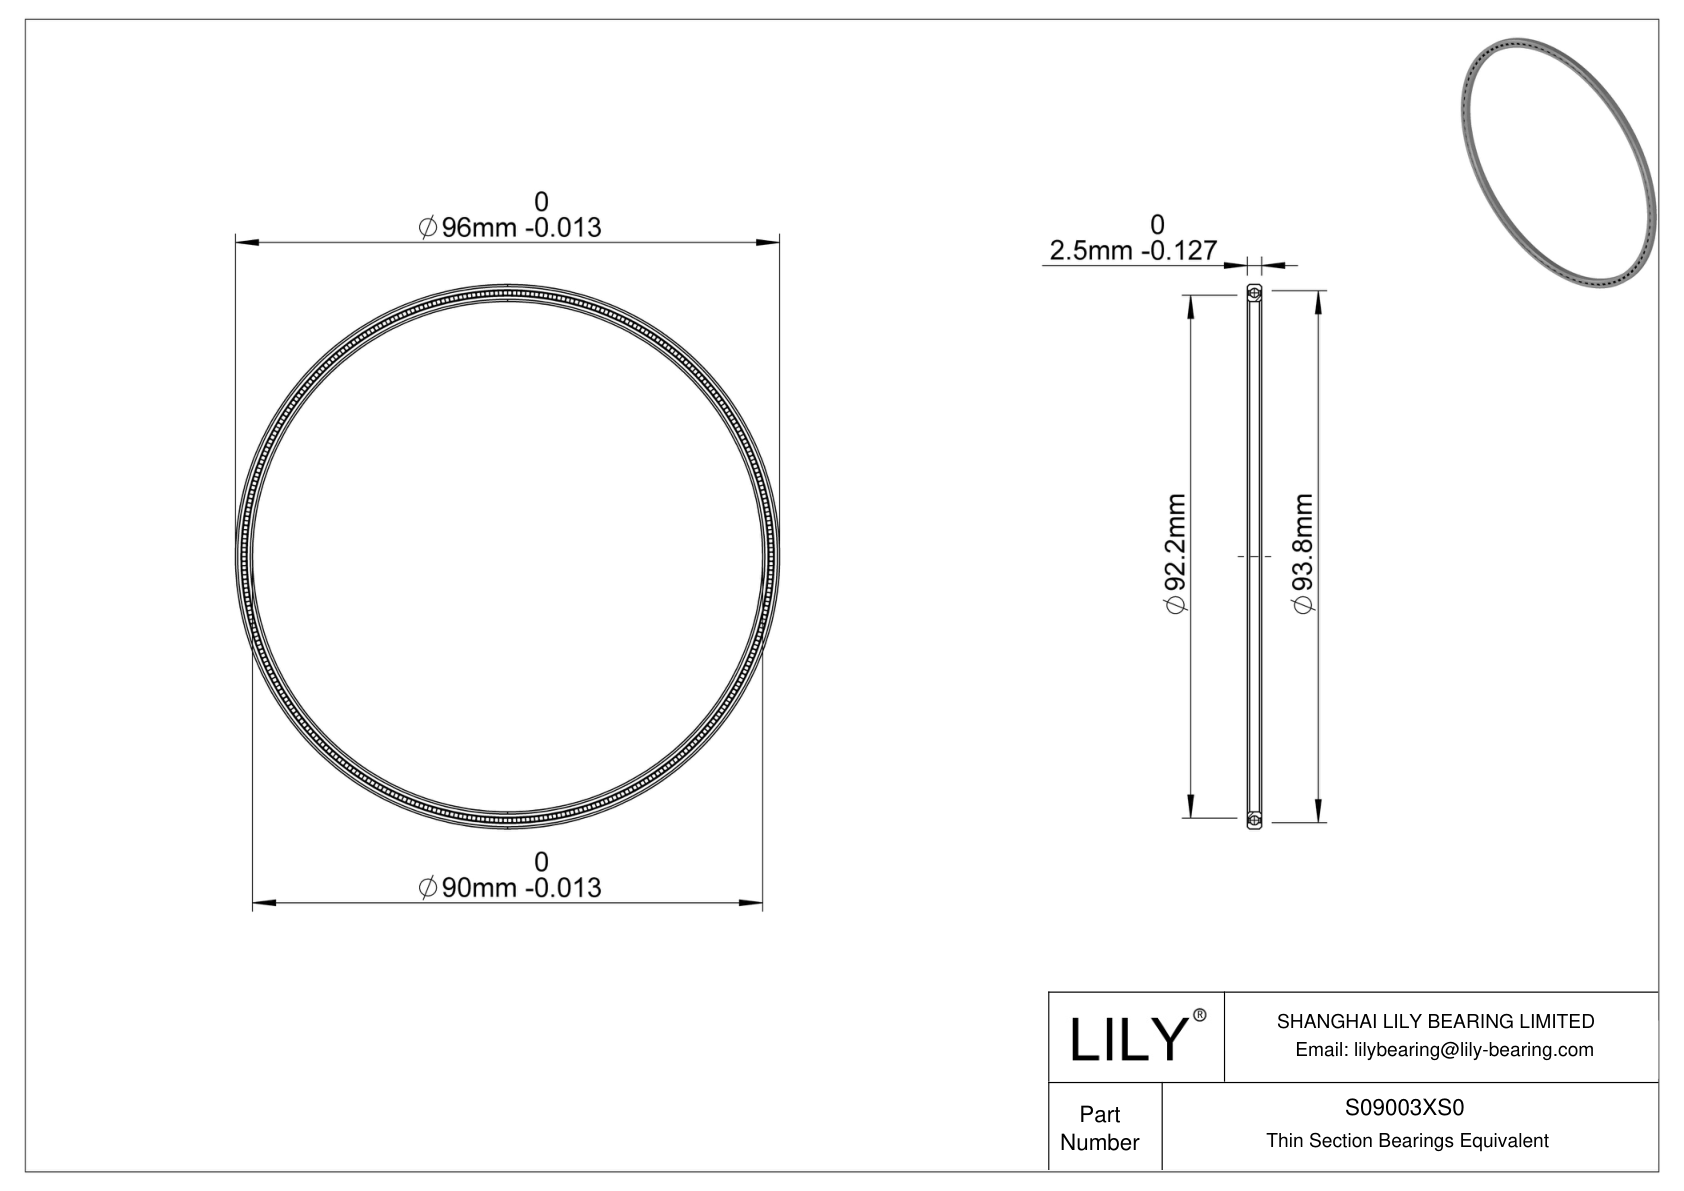 S09003XS0 Constant Section (CS) Bearings cad drawing